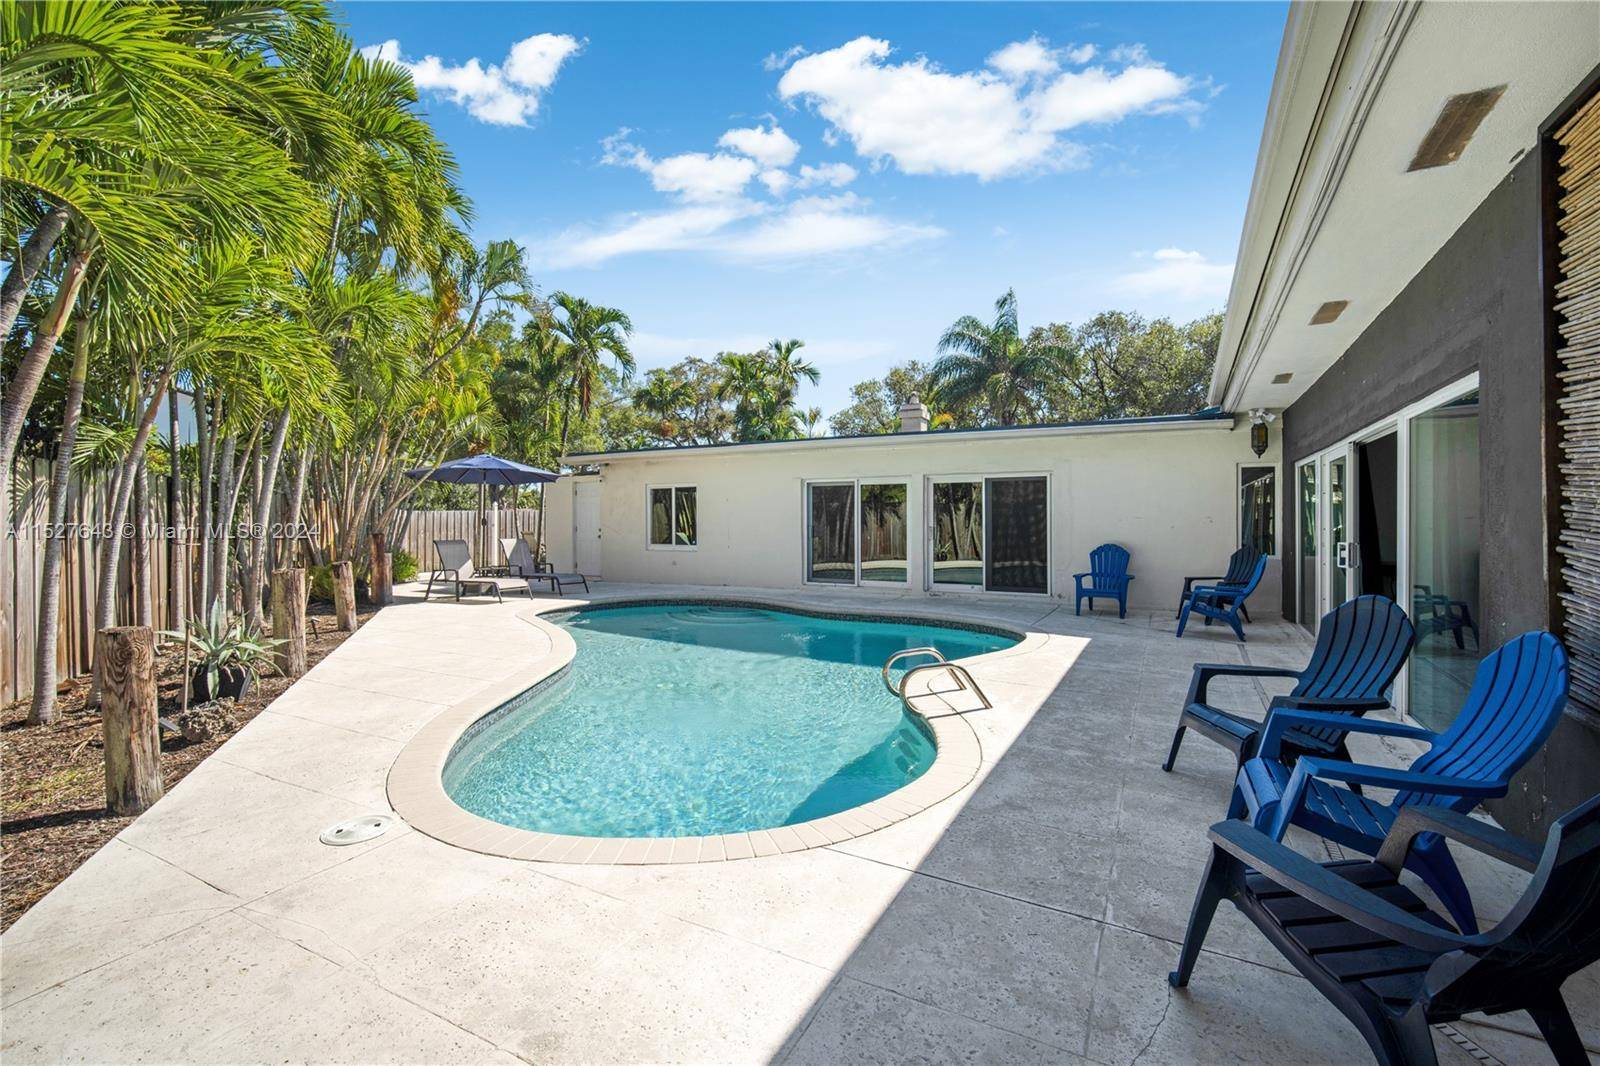 Pool maintenance, lawn maintenance, internet and standard home cleaning included in the rent !